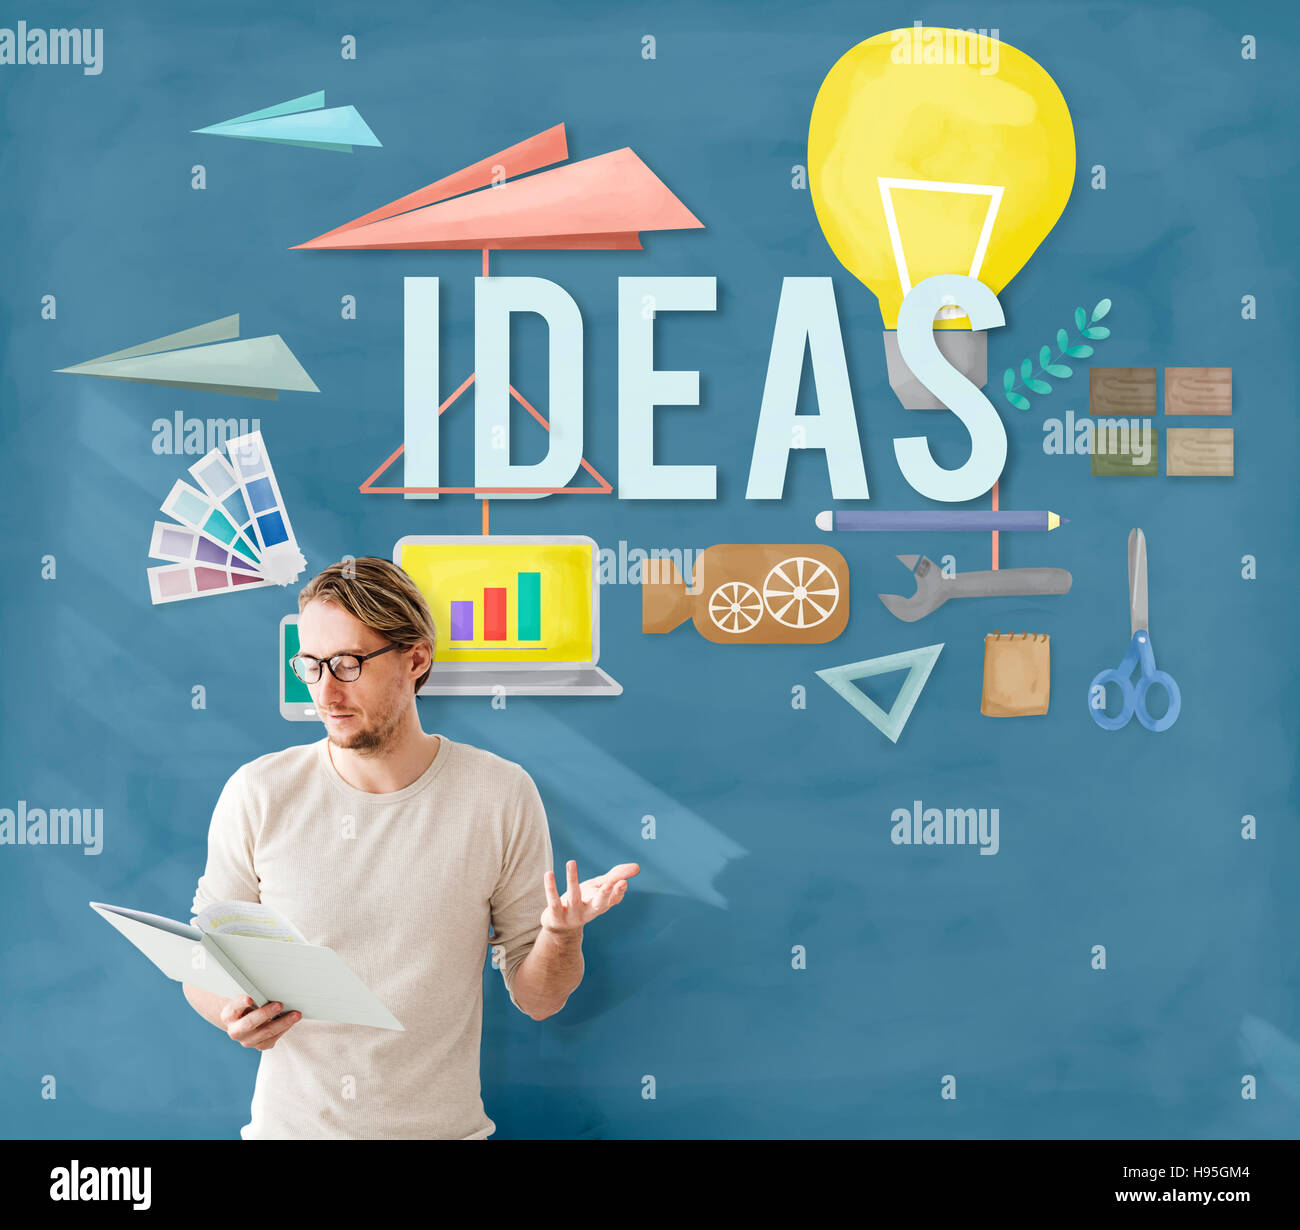 Ideas Proposition Strategy Suggestion Tactics Concept Stock Photo